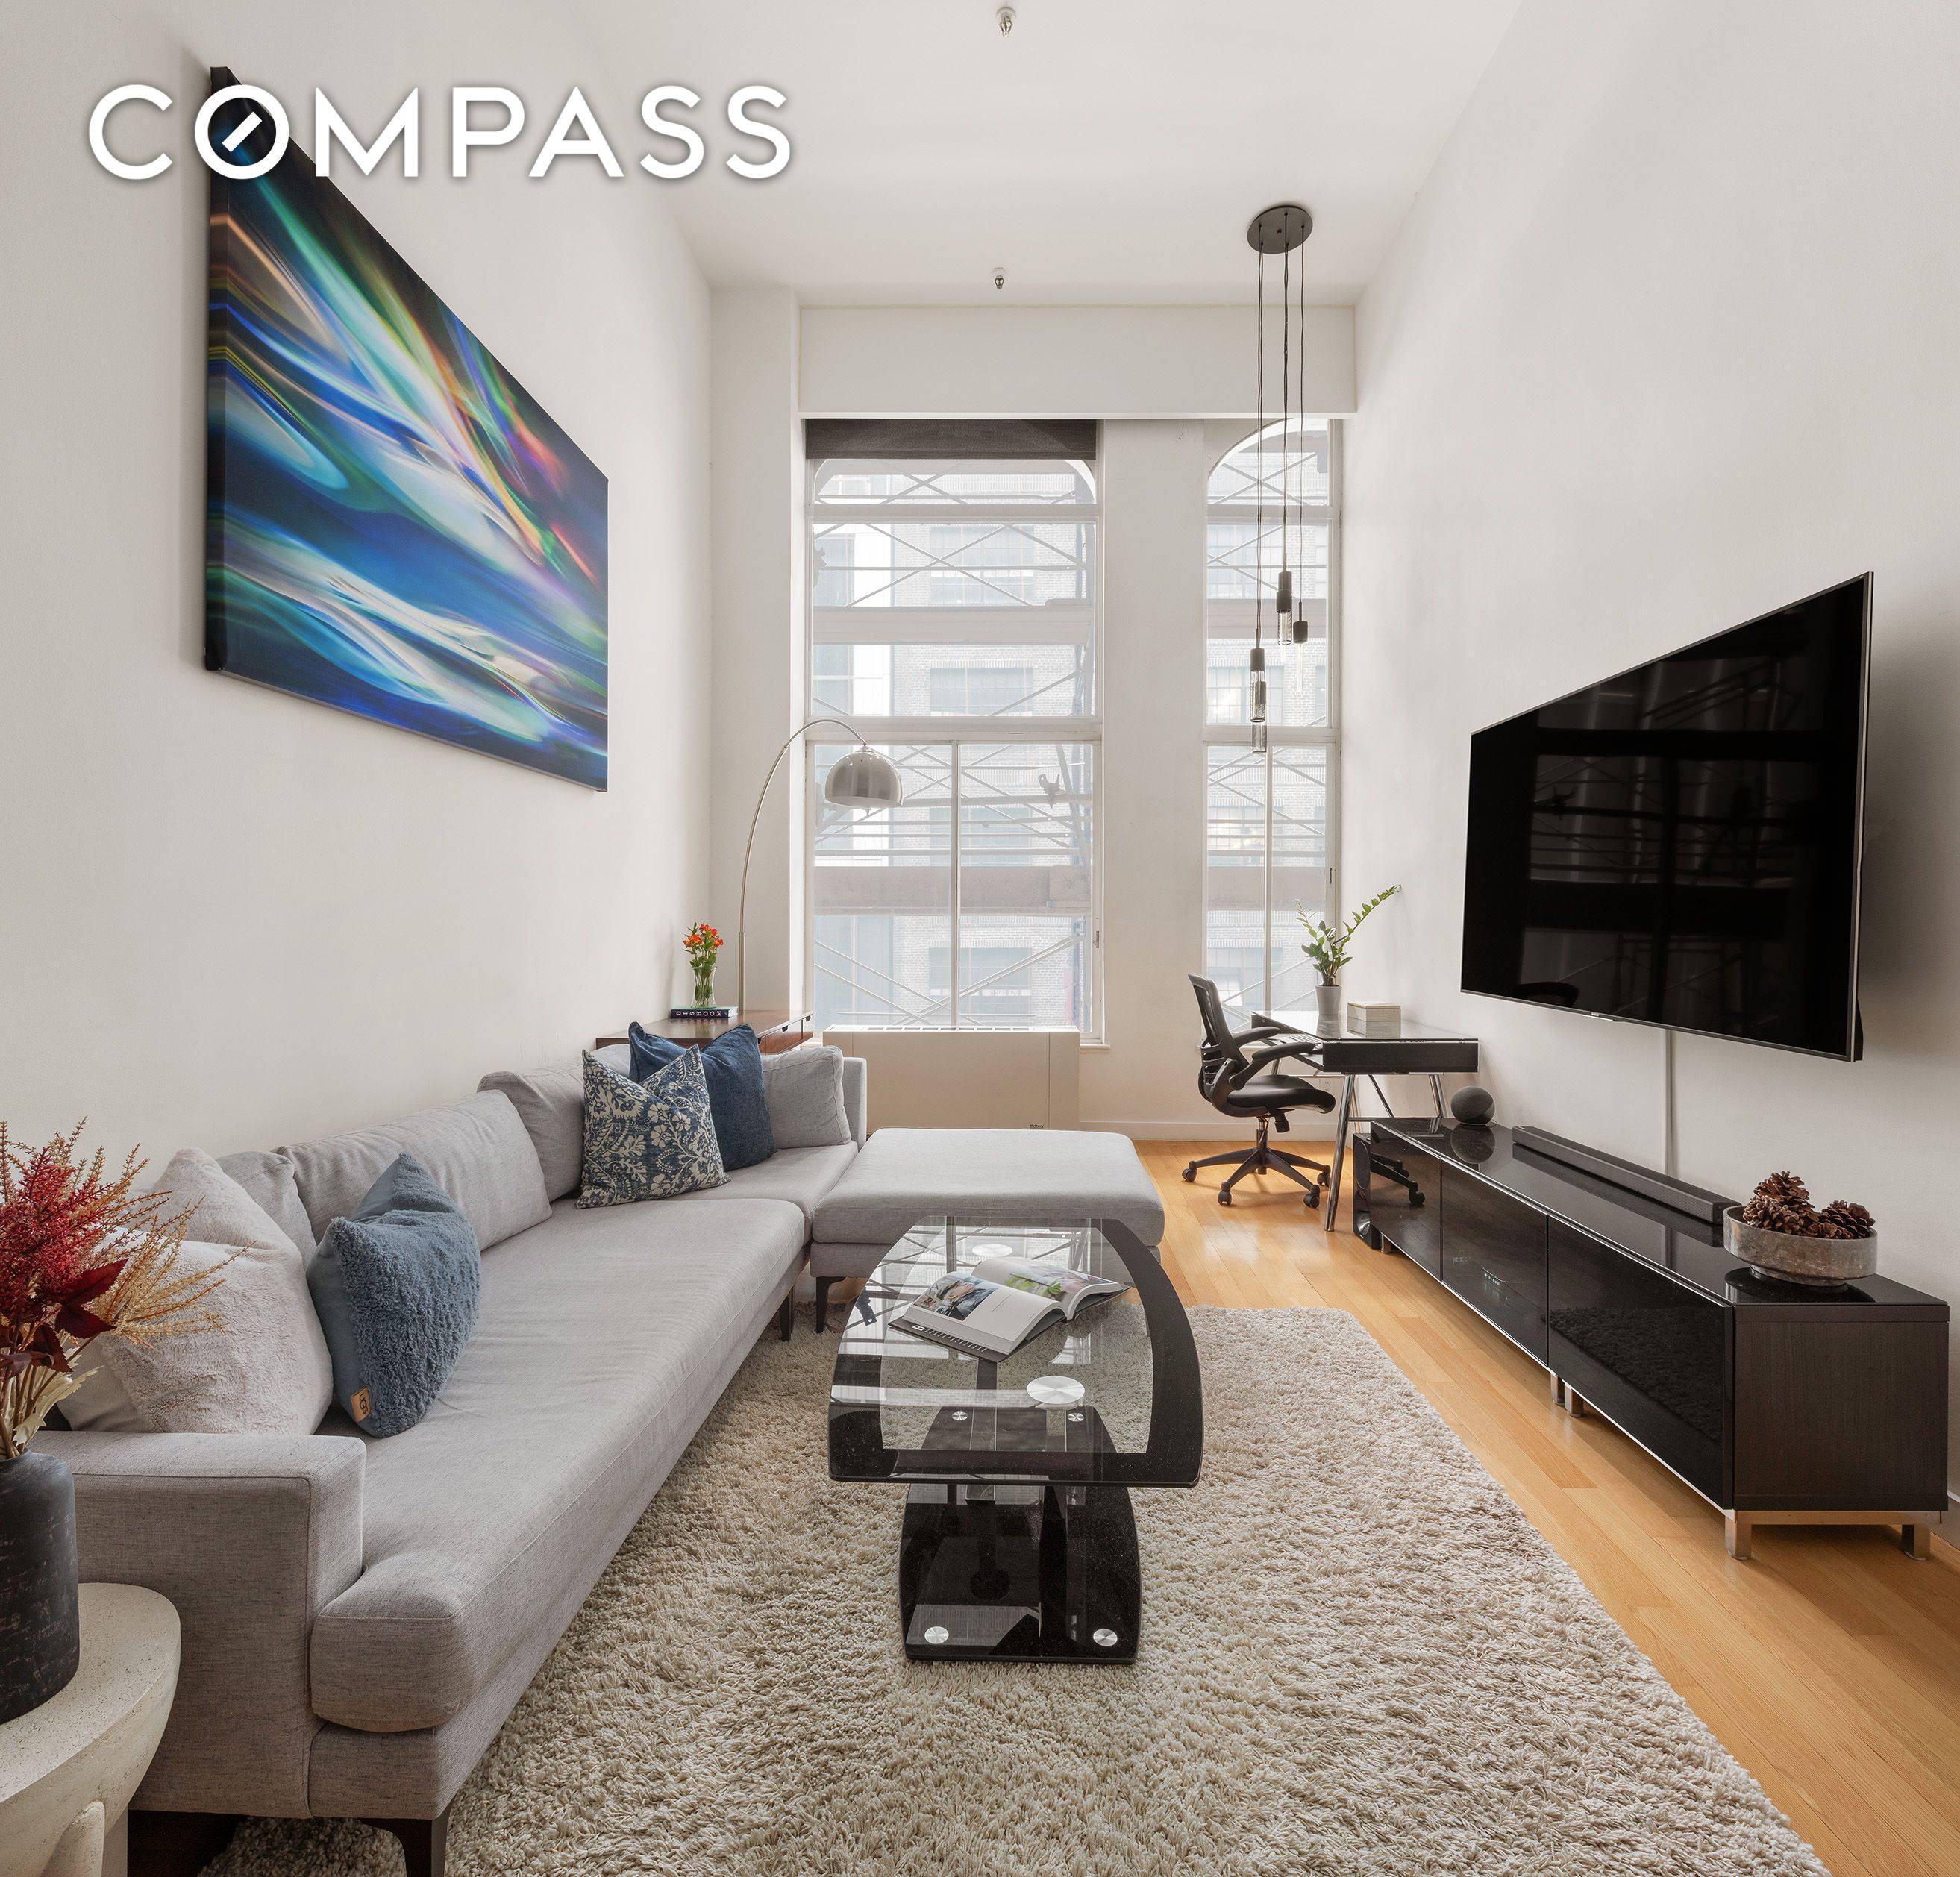 Welcome to Unit 309 at 67 East 11th Street a stunningly renovated one bedroom loft with southern exposure and 16 ft ceilings, once prominently featured in Dwell Magazine.